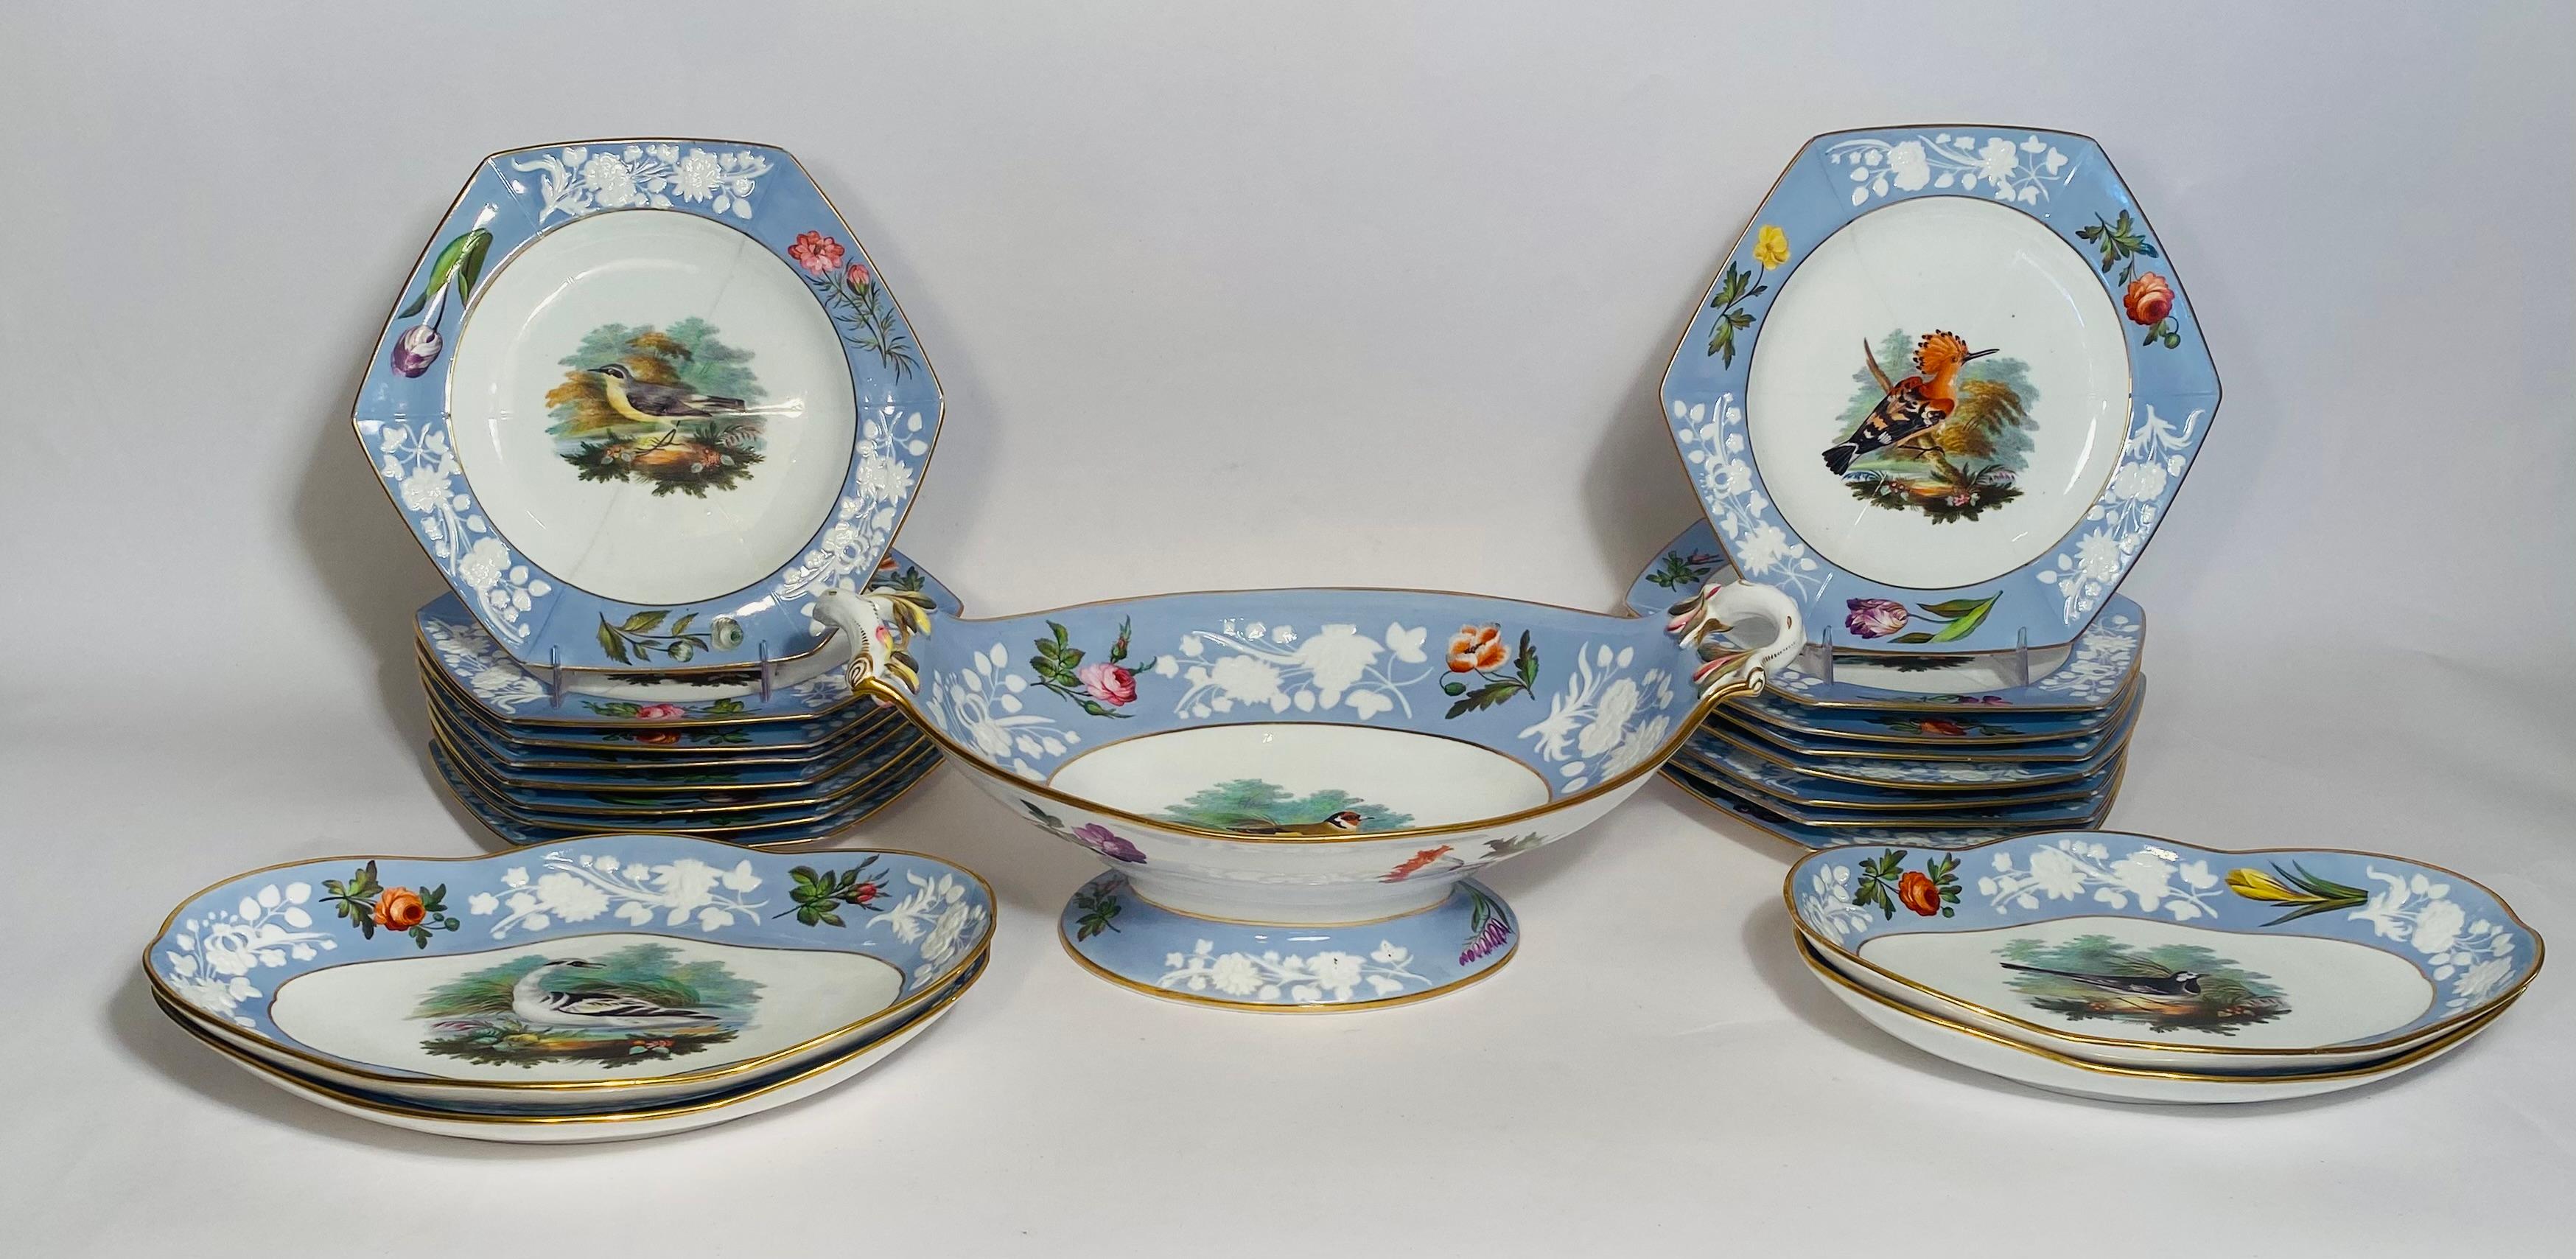 Gold Antique English Periwinkle Blue Dessert Service for 16, Spode Circa 1820  For Sale